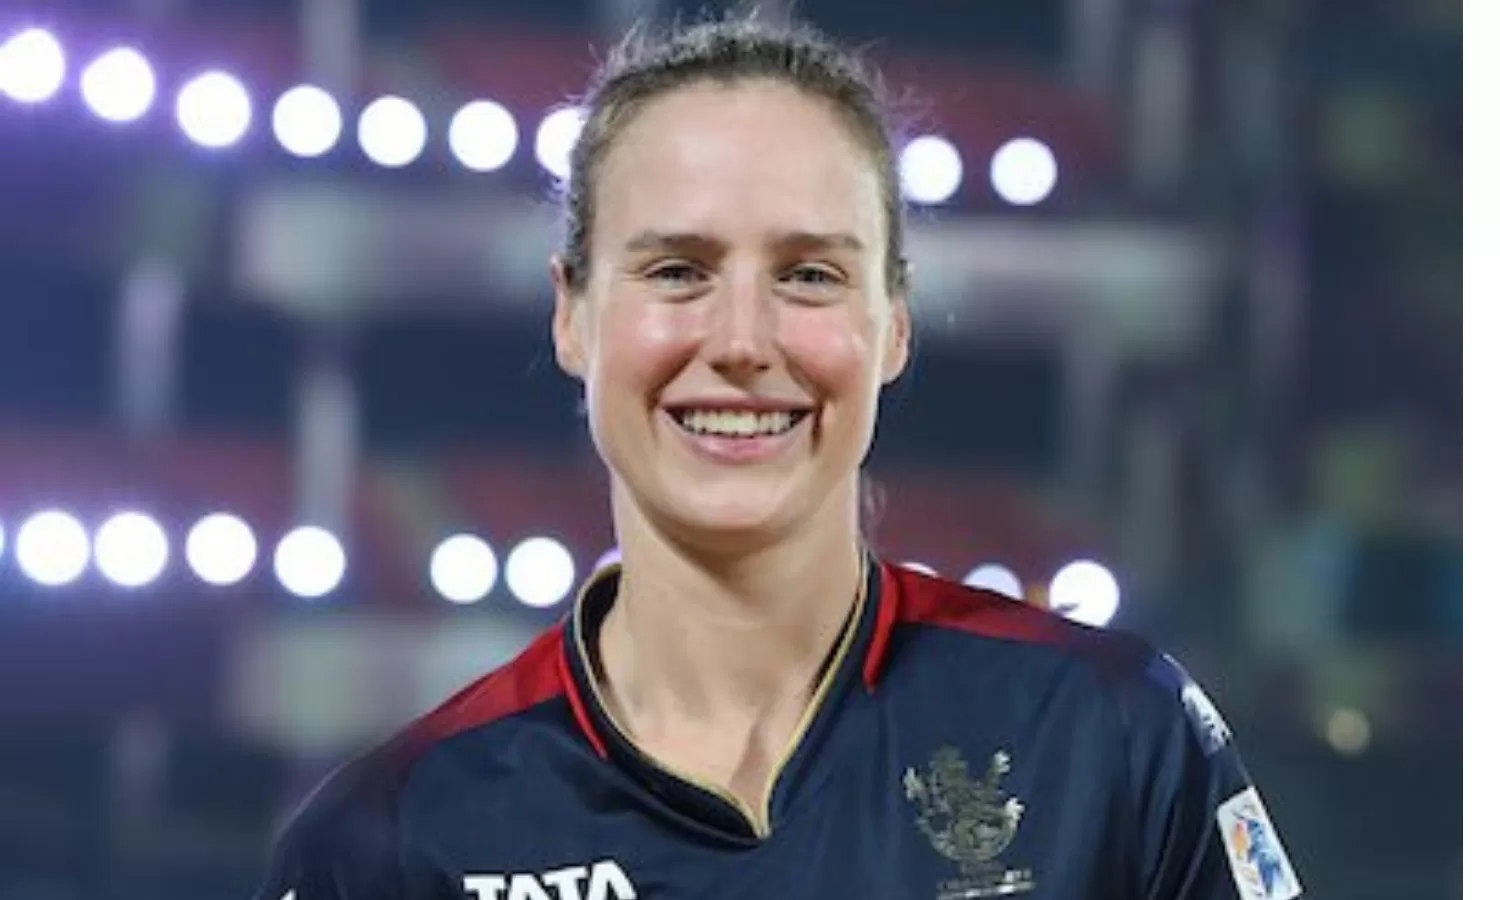 'We've got some of the best spinners in the world in RCB': Ellyse Perry